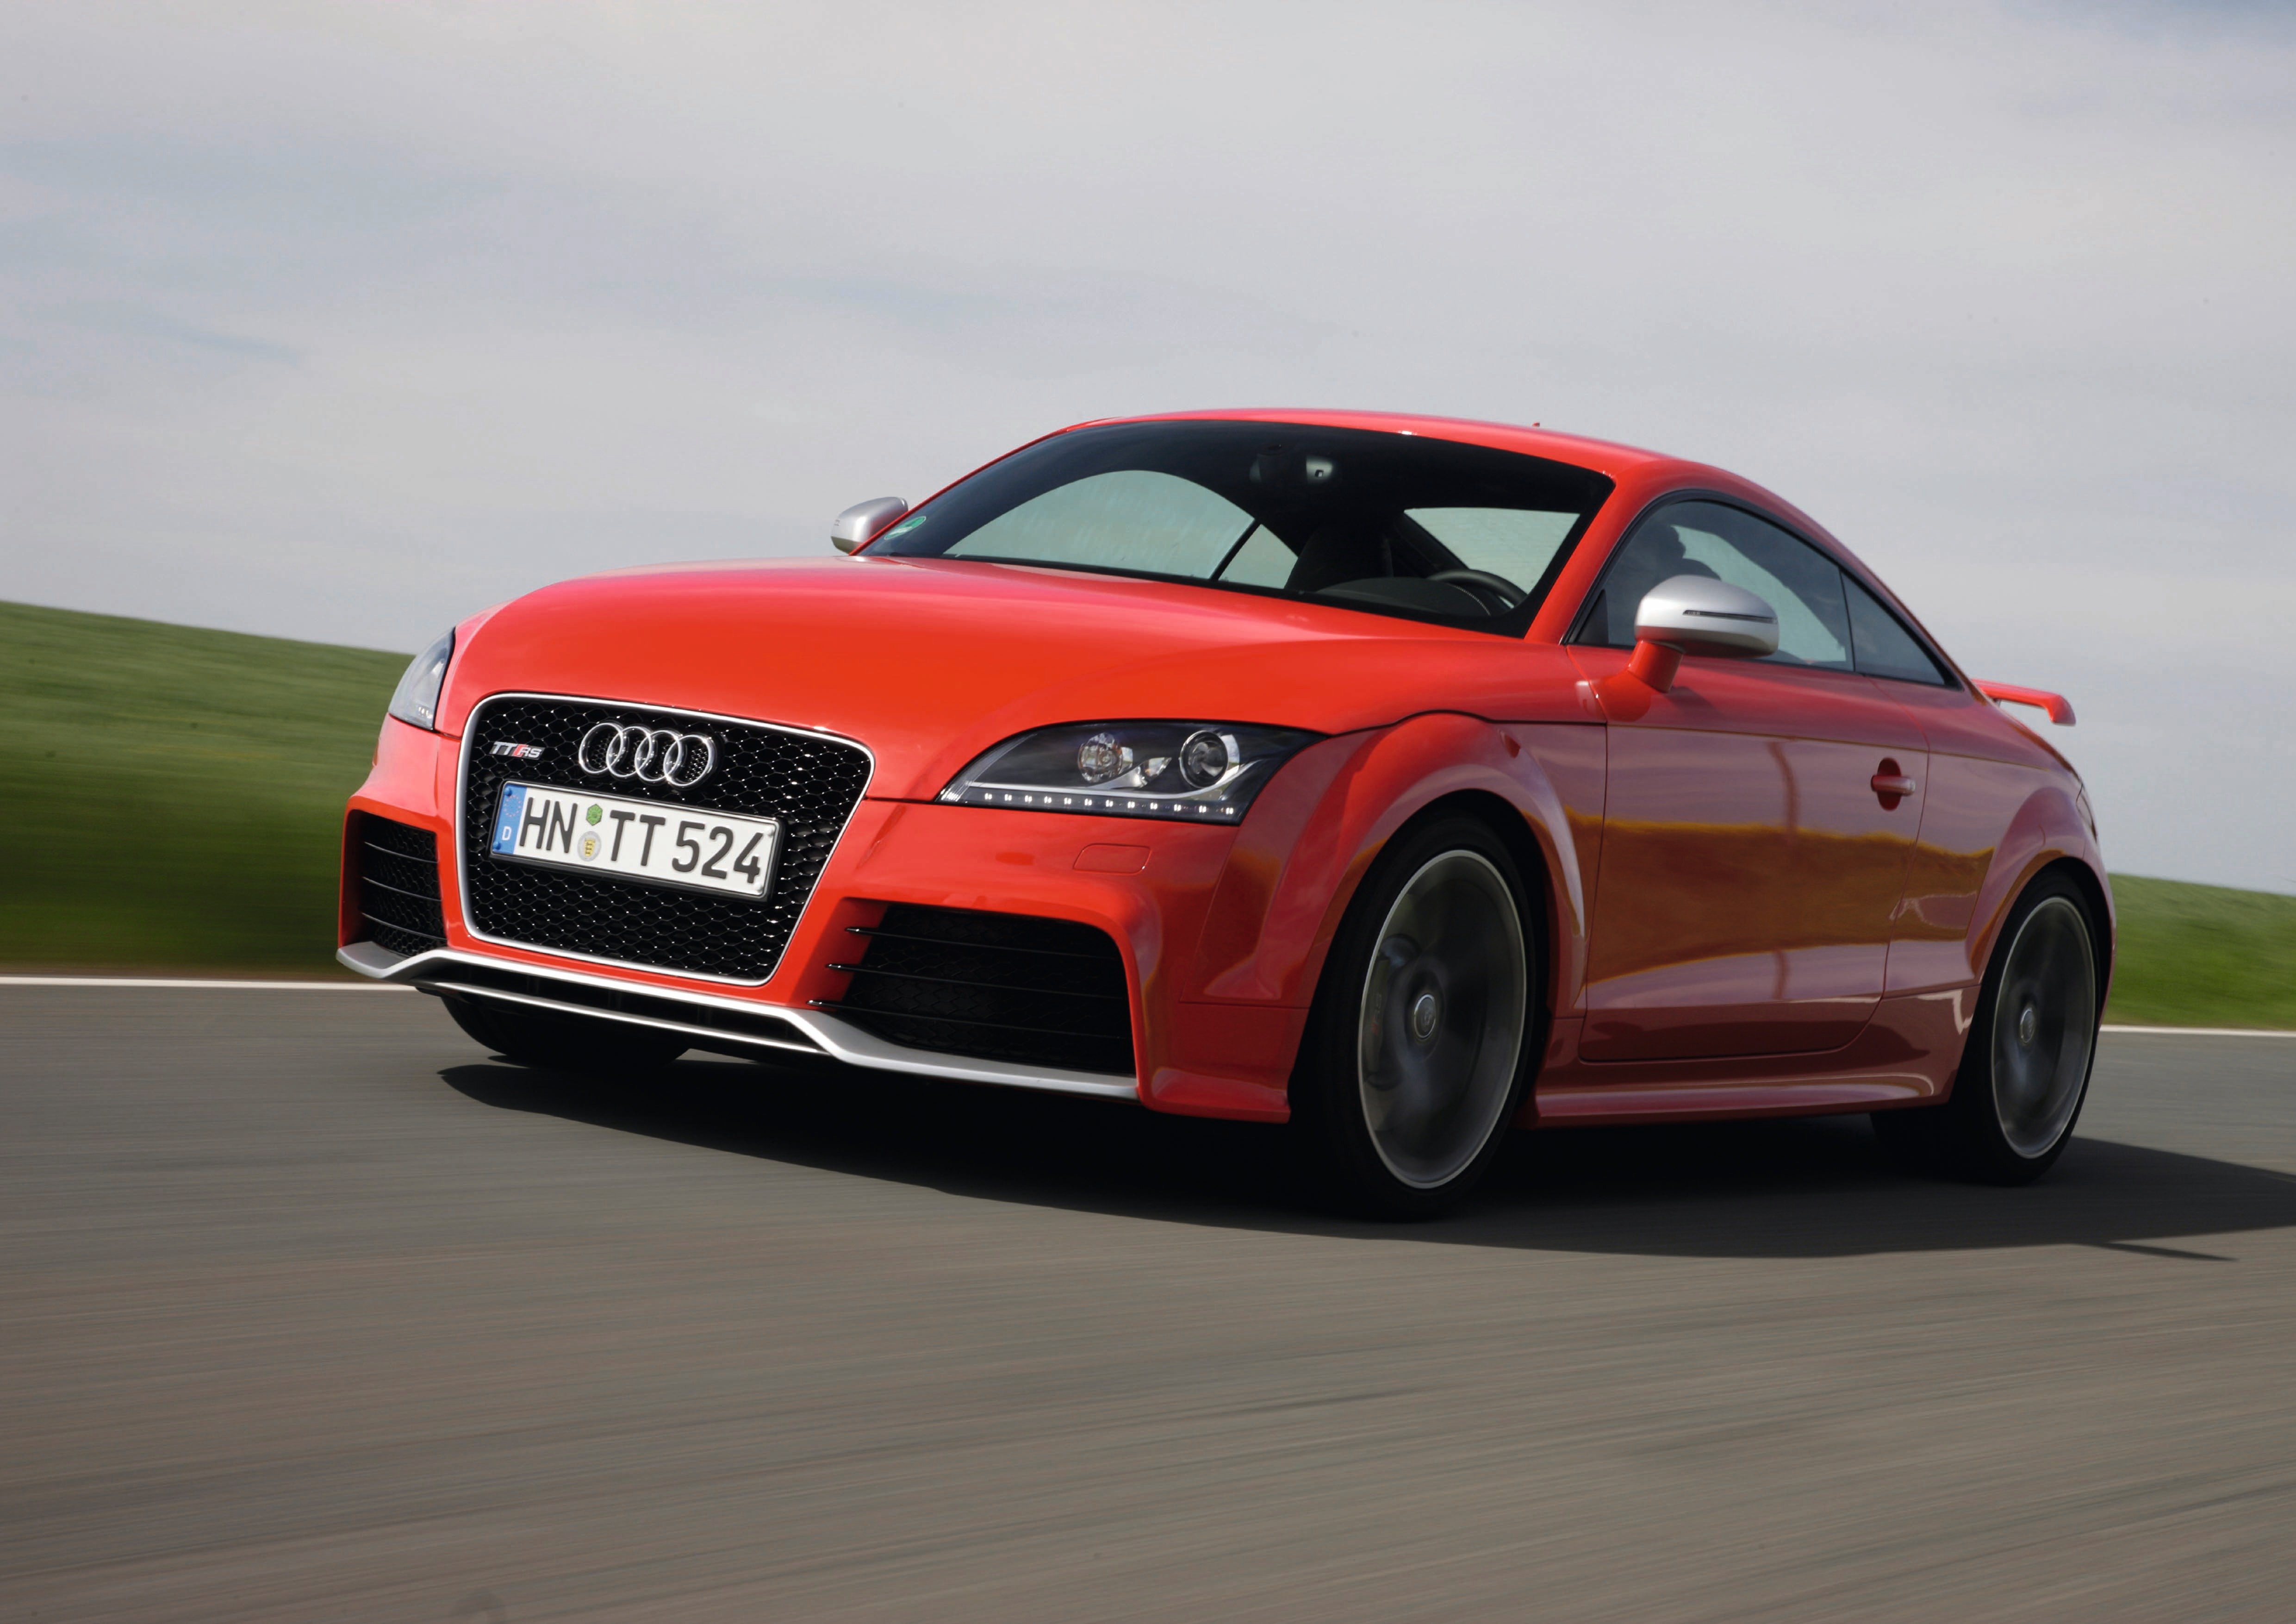 Tt sotwe. Audi TT RS 8j. Audi TT RS 2009. Audi TT RS 2010. Audi TT RS Coupe 2010.